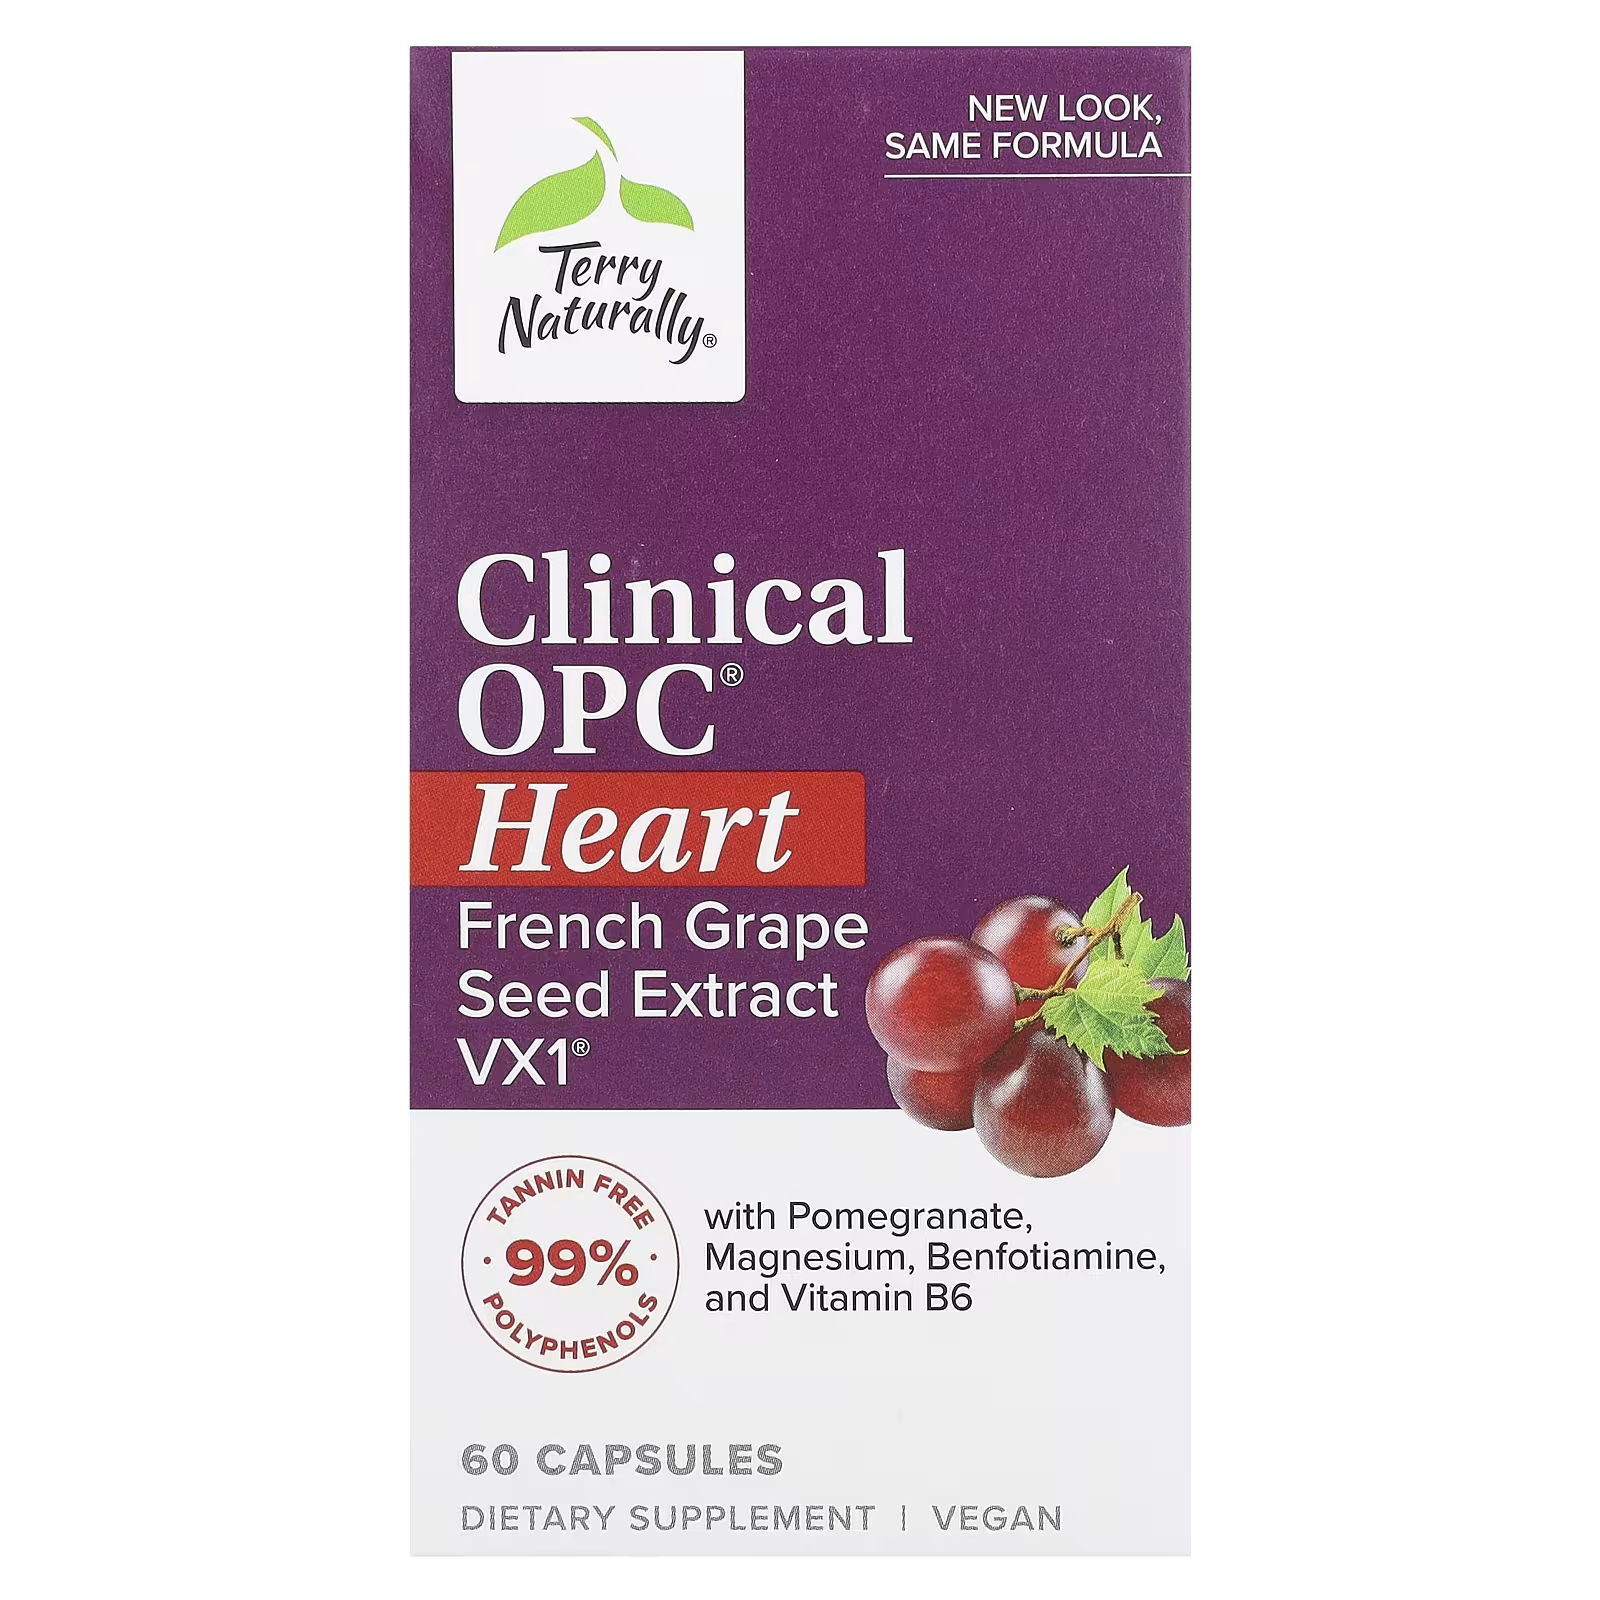 Terry Naturally Clinical OPC Heart 60 капсул terry naturally clinical opc heart 60 капсул